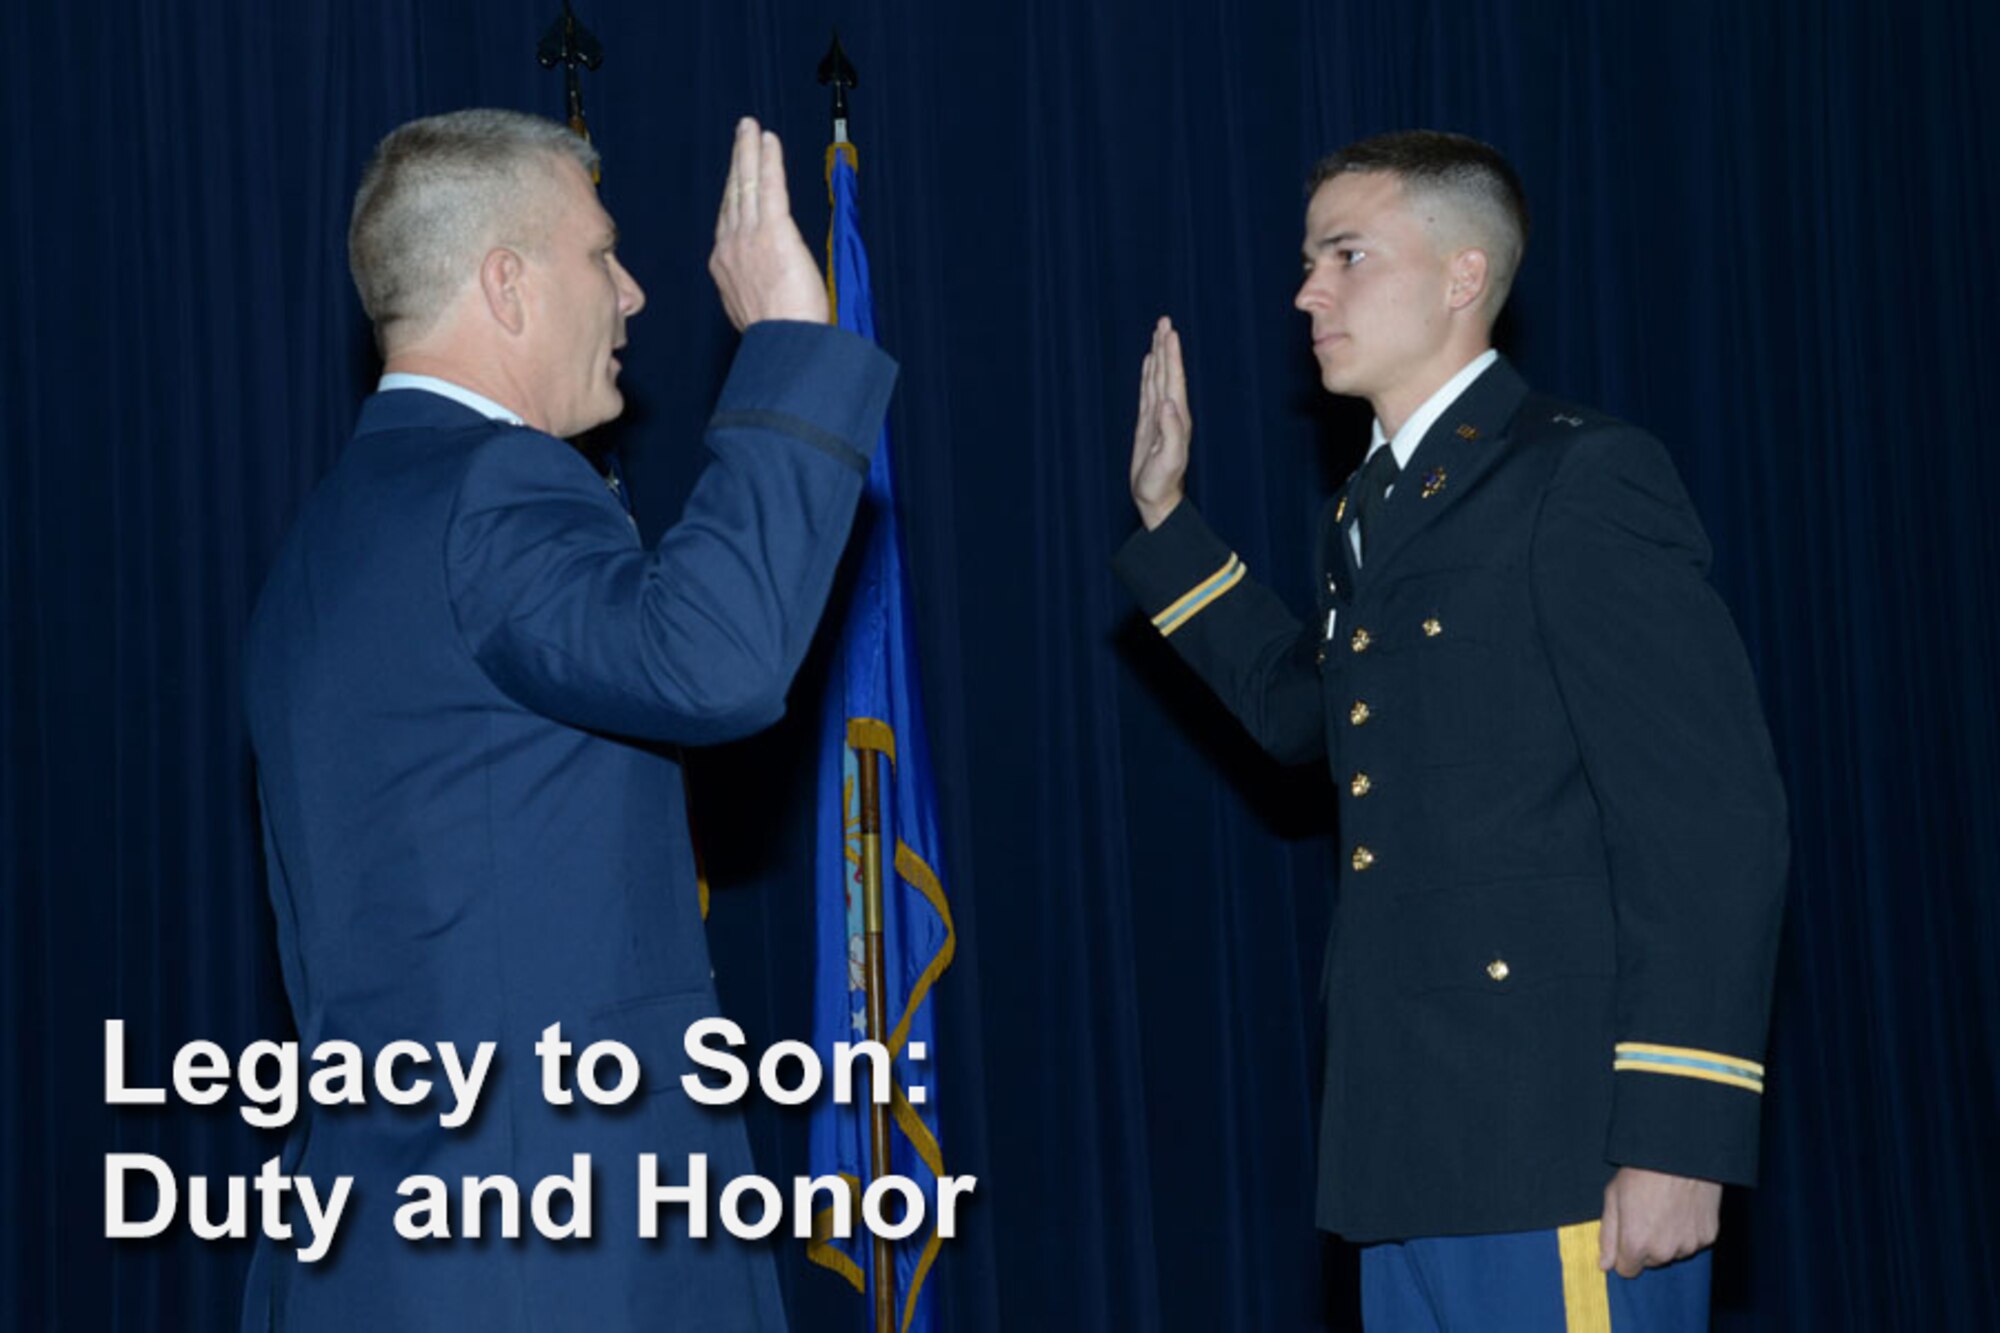 Col. Kyle 'Cowboy' Ingham administers the oath of office to 2nd Lt. Austin Ingham during ceremonies celebrating the colonel's retirement and his son's commissioning on May 20 at Joint Base-Randolph, Texas. (Air Force photo by Joel Martinez)